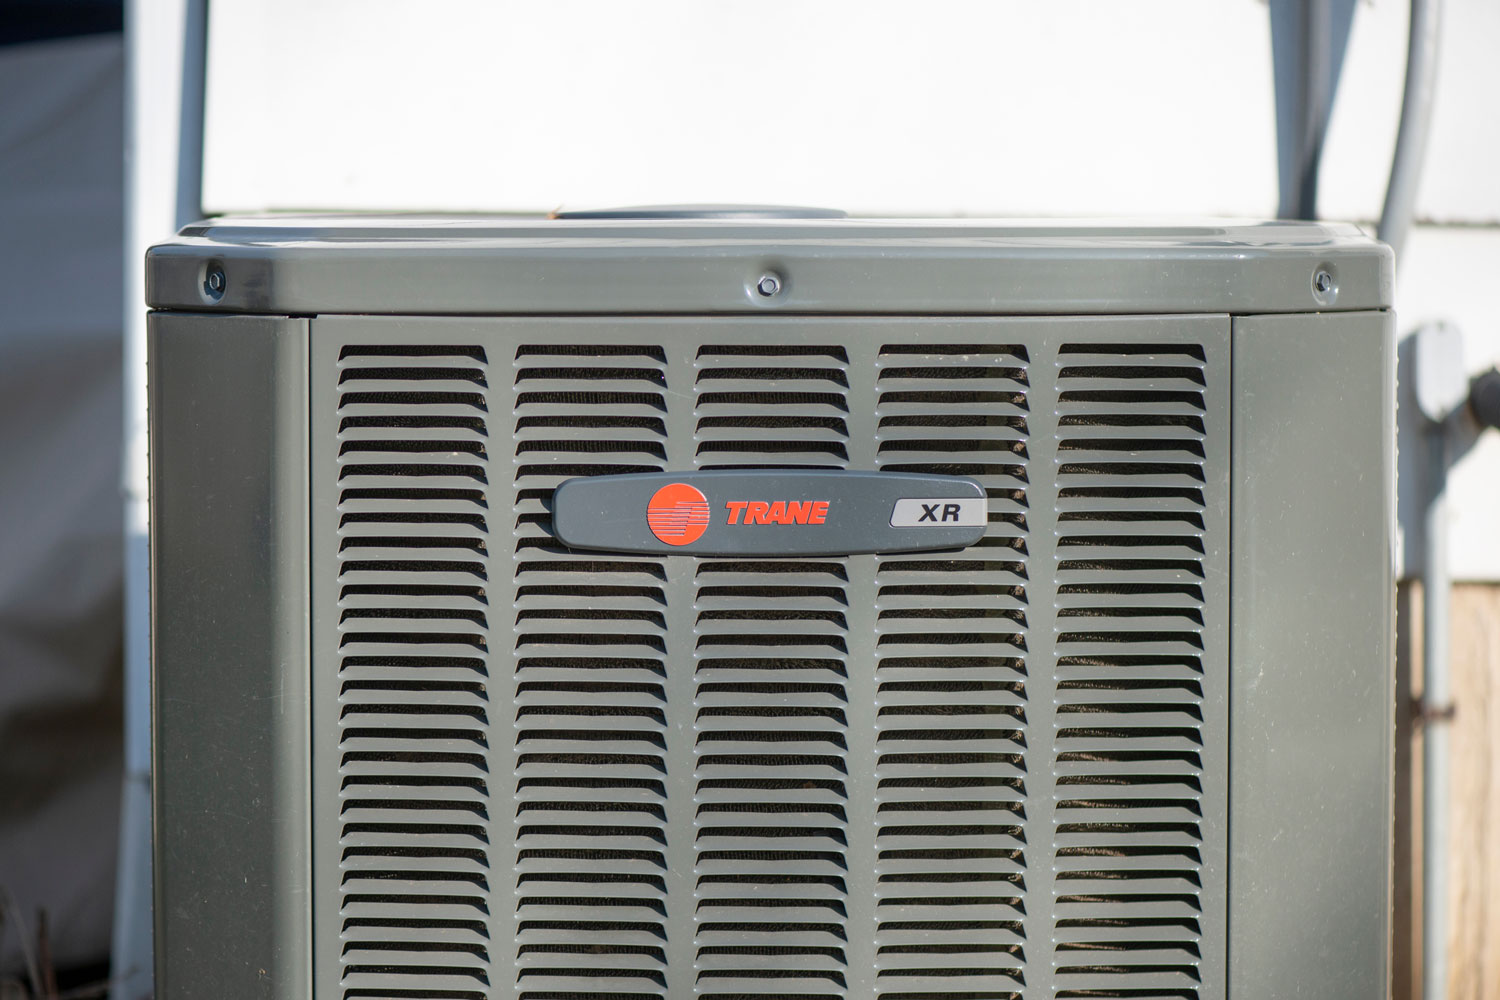 A Trane air conditioning unit outside